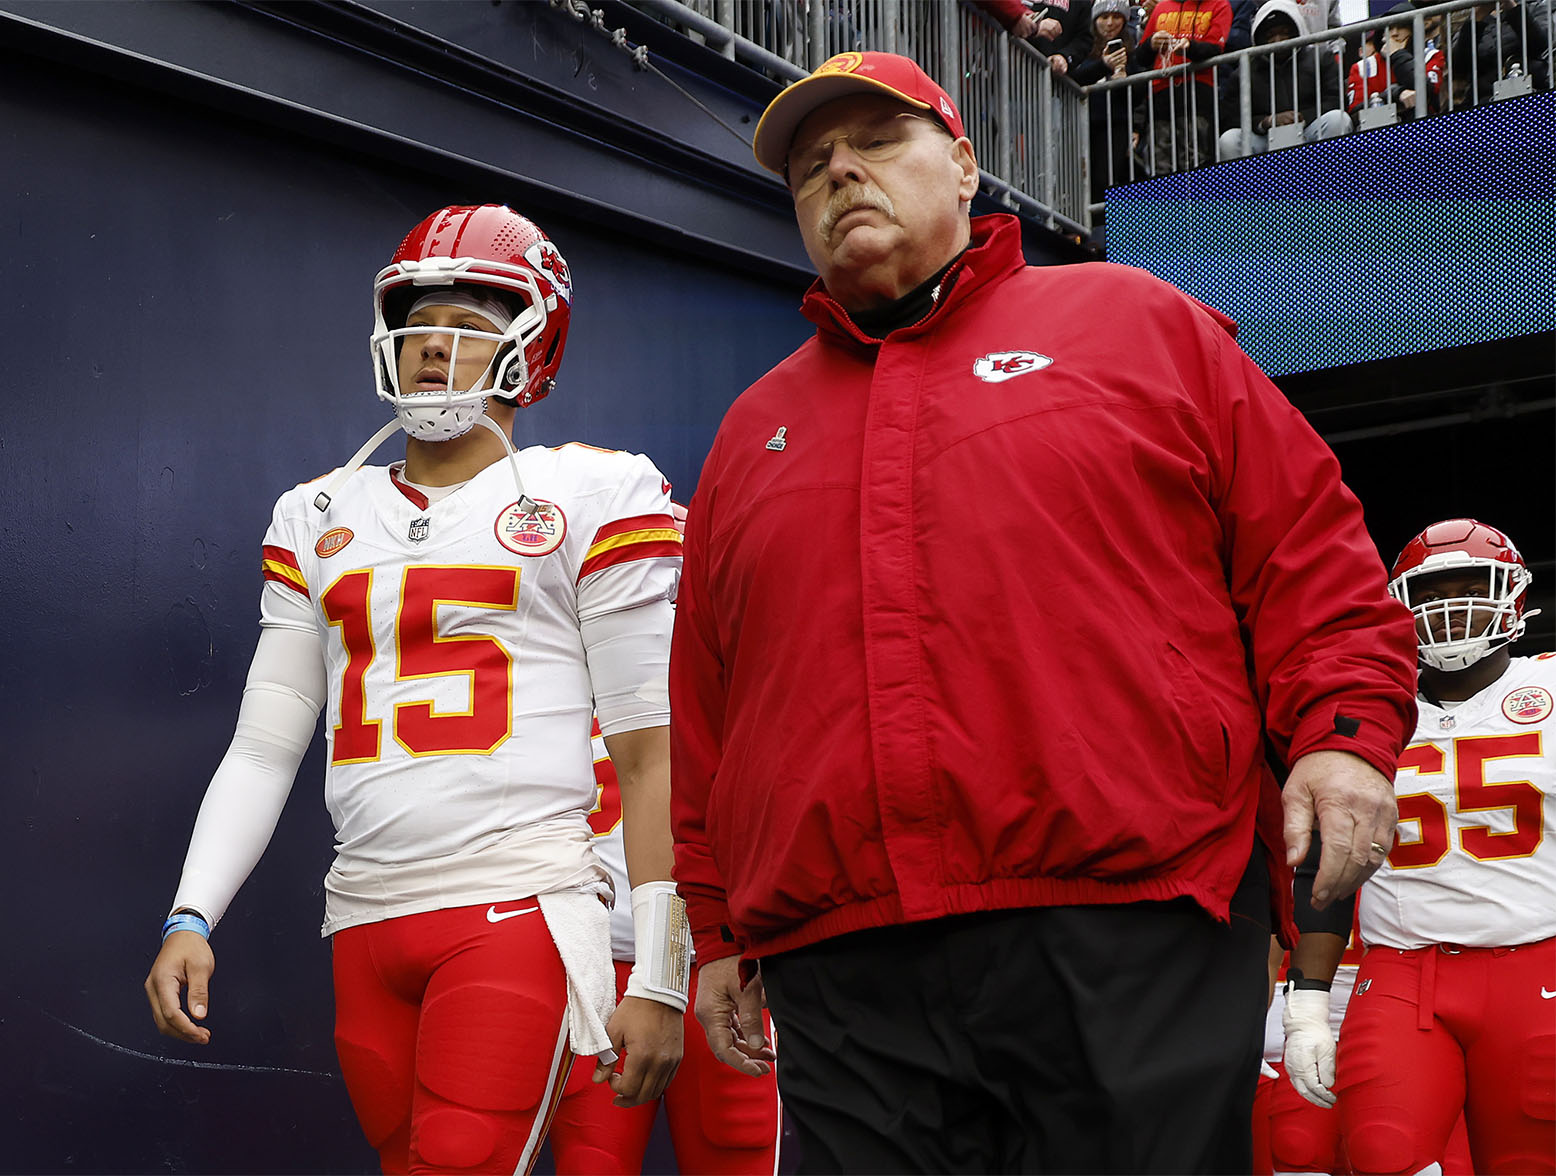 FOXBOROUGH, MASSACHUSETTS - DECEMBER 17: Patrick Mahomes #15 of the Kansas City Chiefs and head coach Andy Reid of the Kansas City Chiefs walk onto the field prior to a game against the New England Patriots at Gillette Stadium on December 17, 2023 in Foxborough, Massachusetts. (Photo by Sarah Stier/Getty Images)